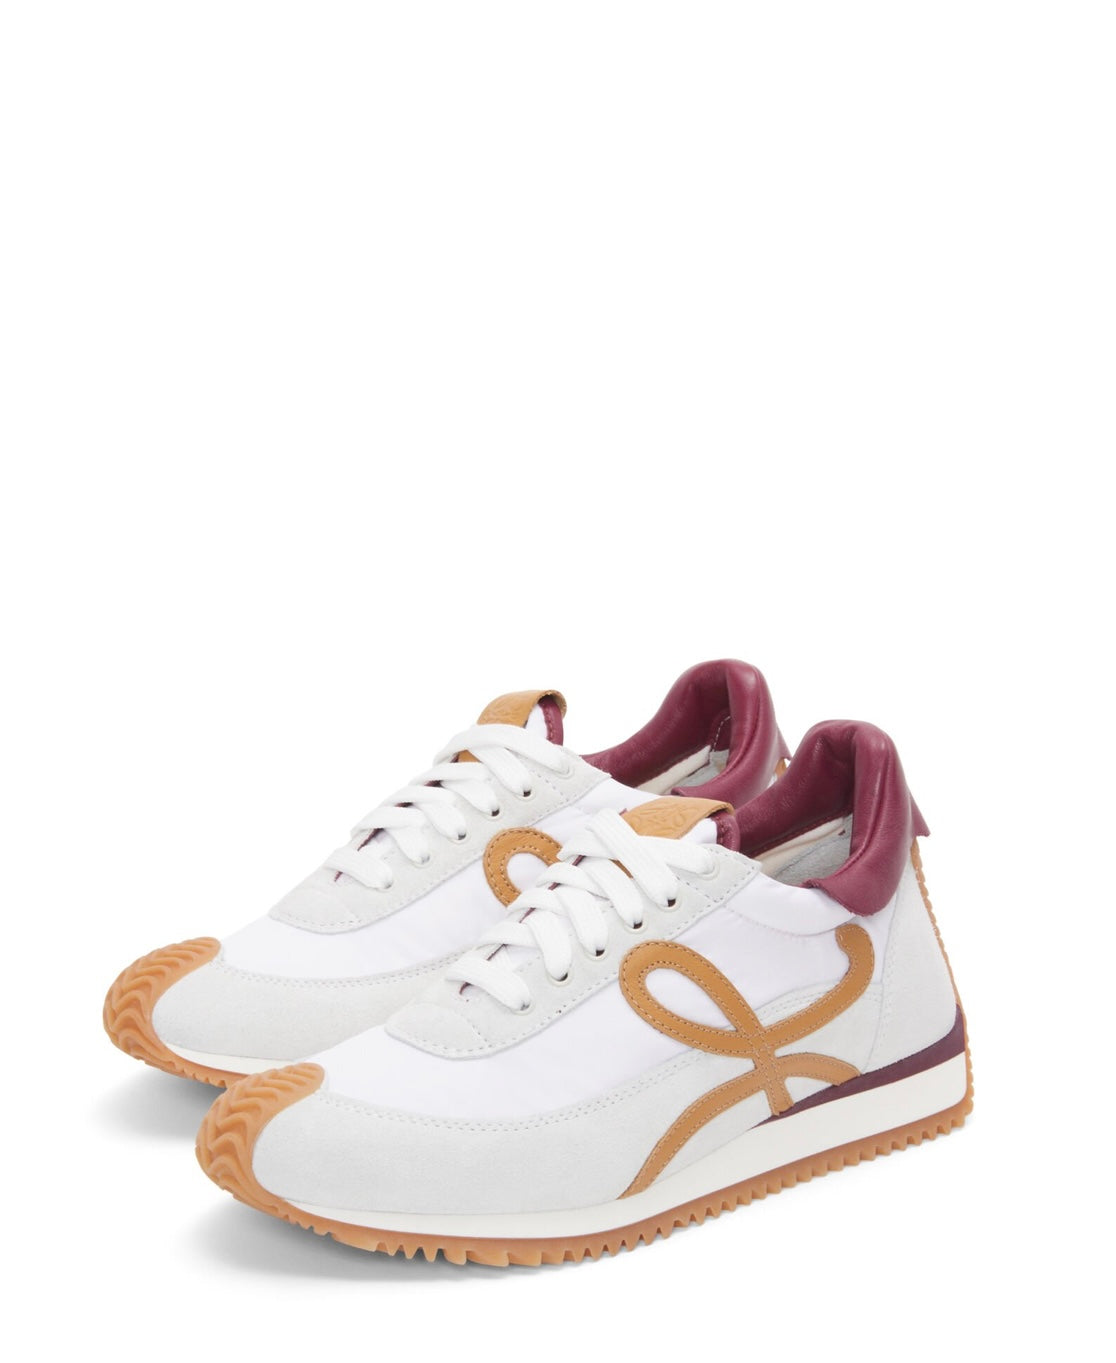 LOEWE - flow runner in mix nylon and suede